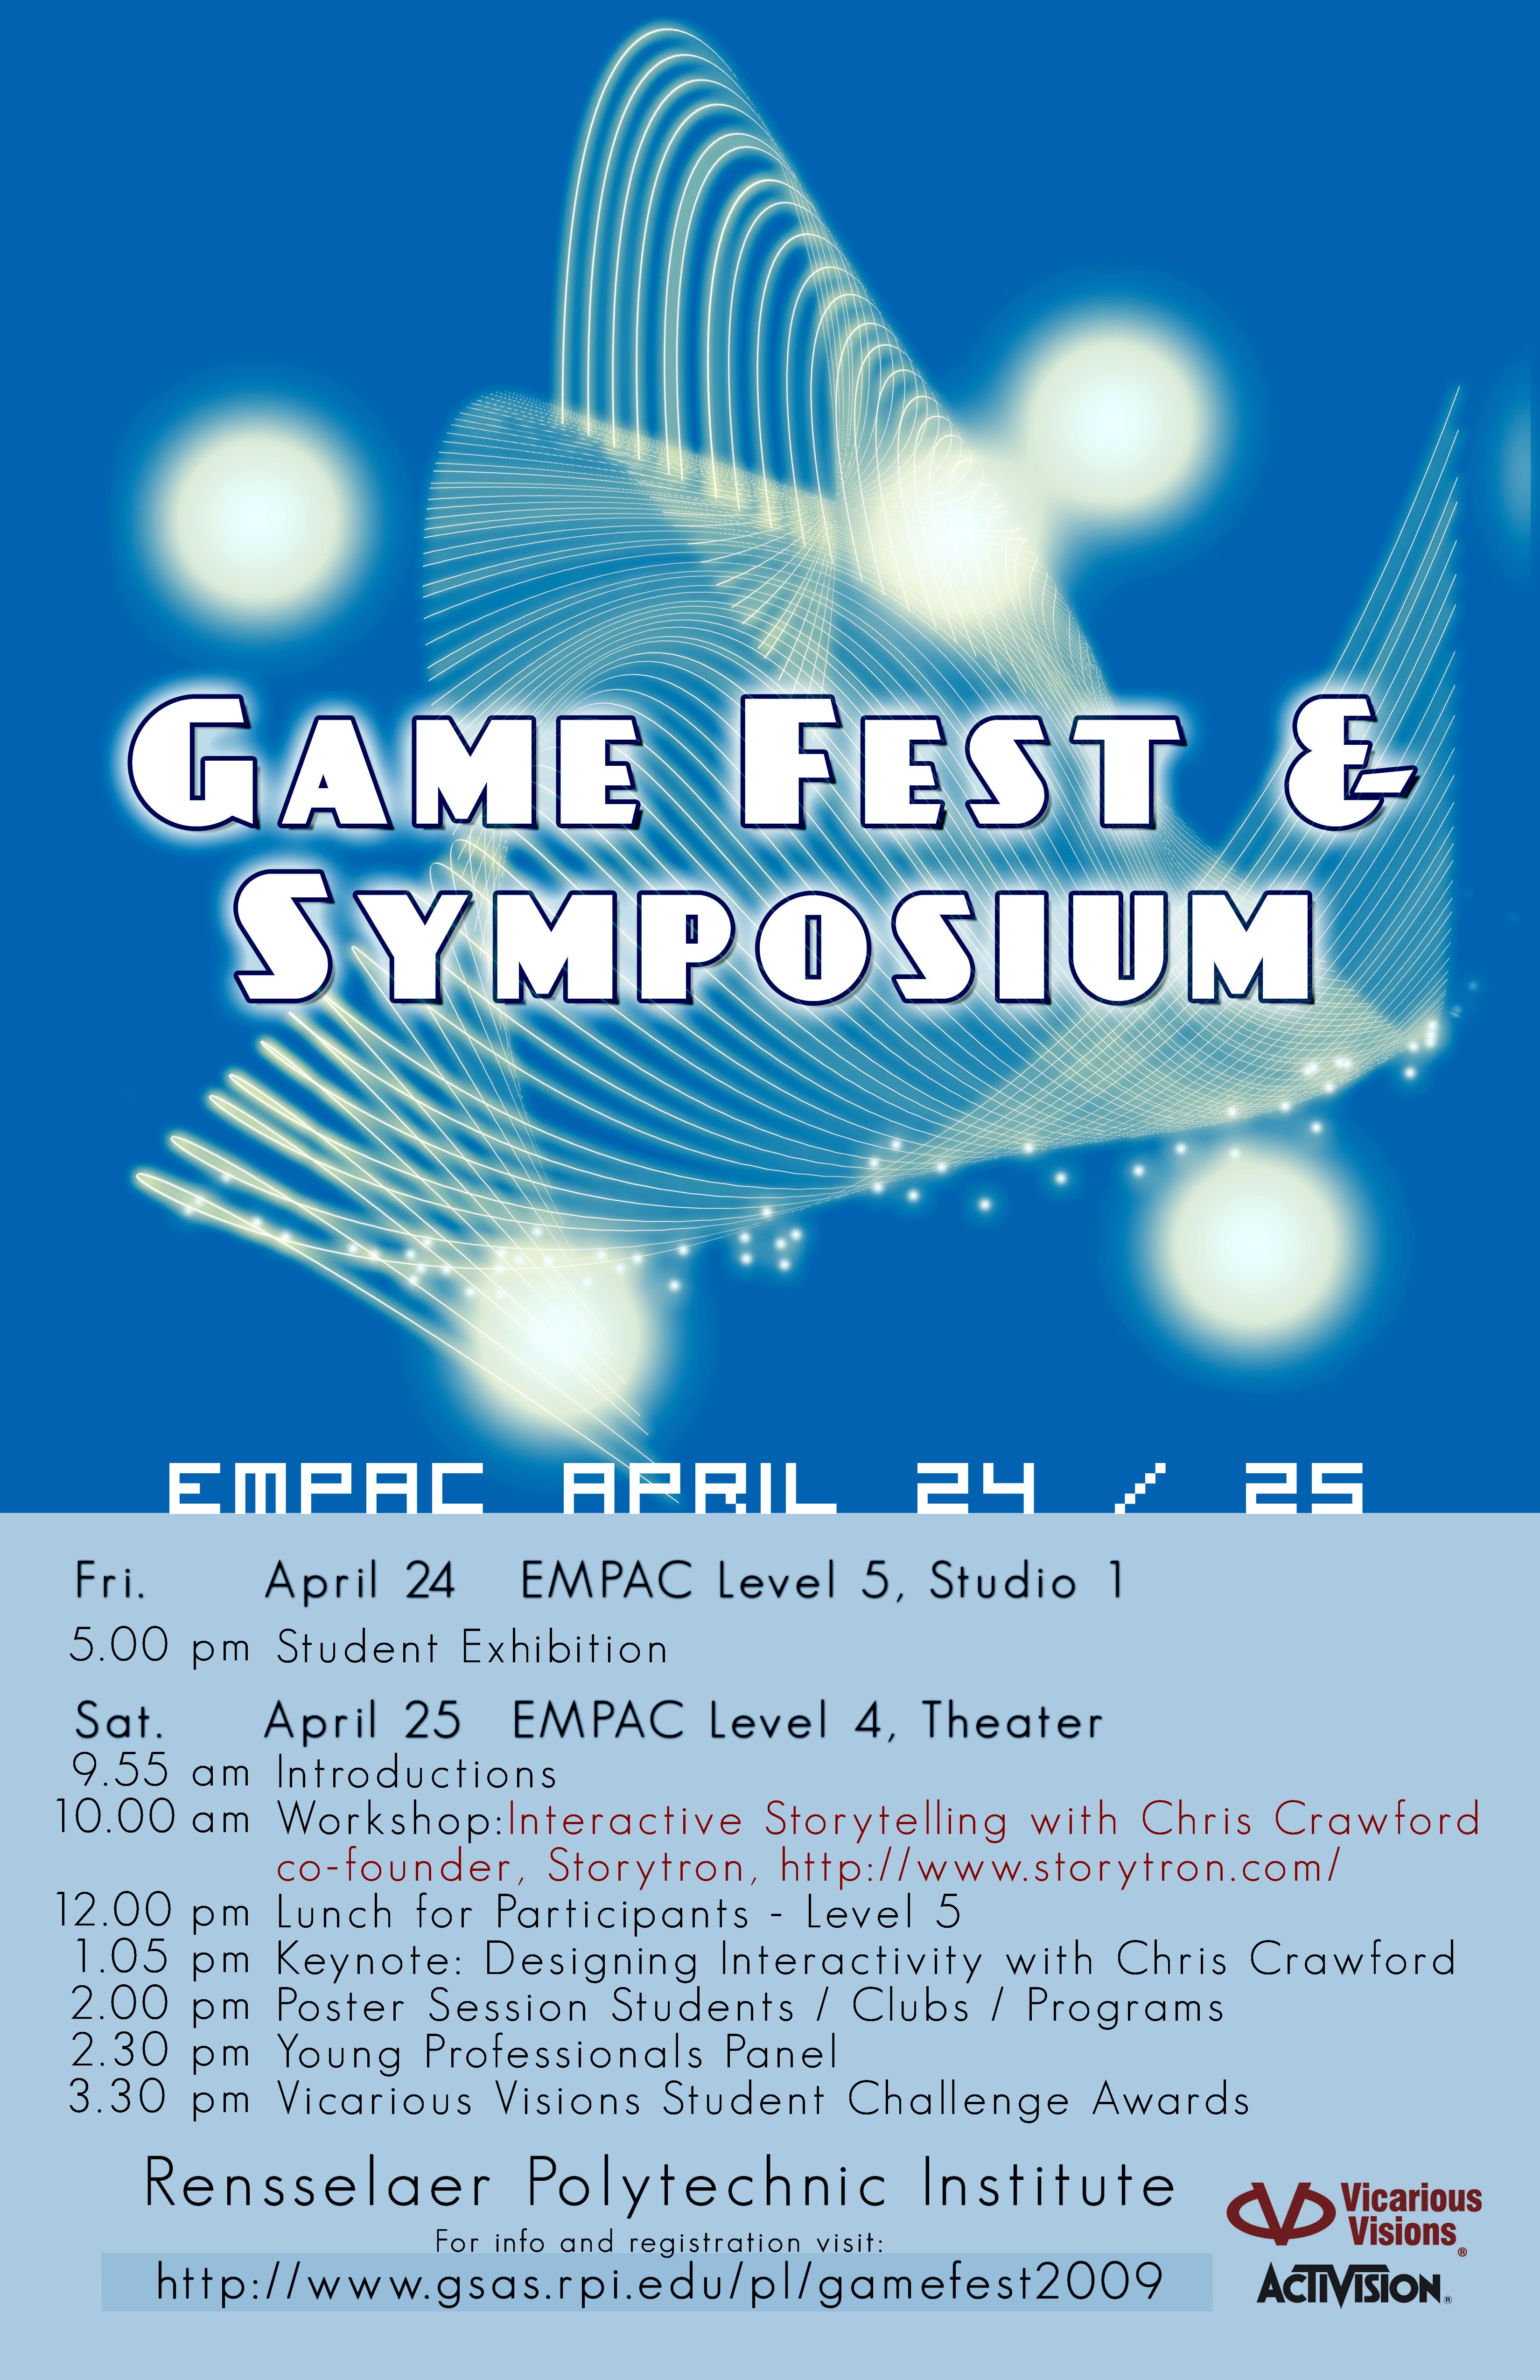 Poster from GameFest 2009.